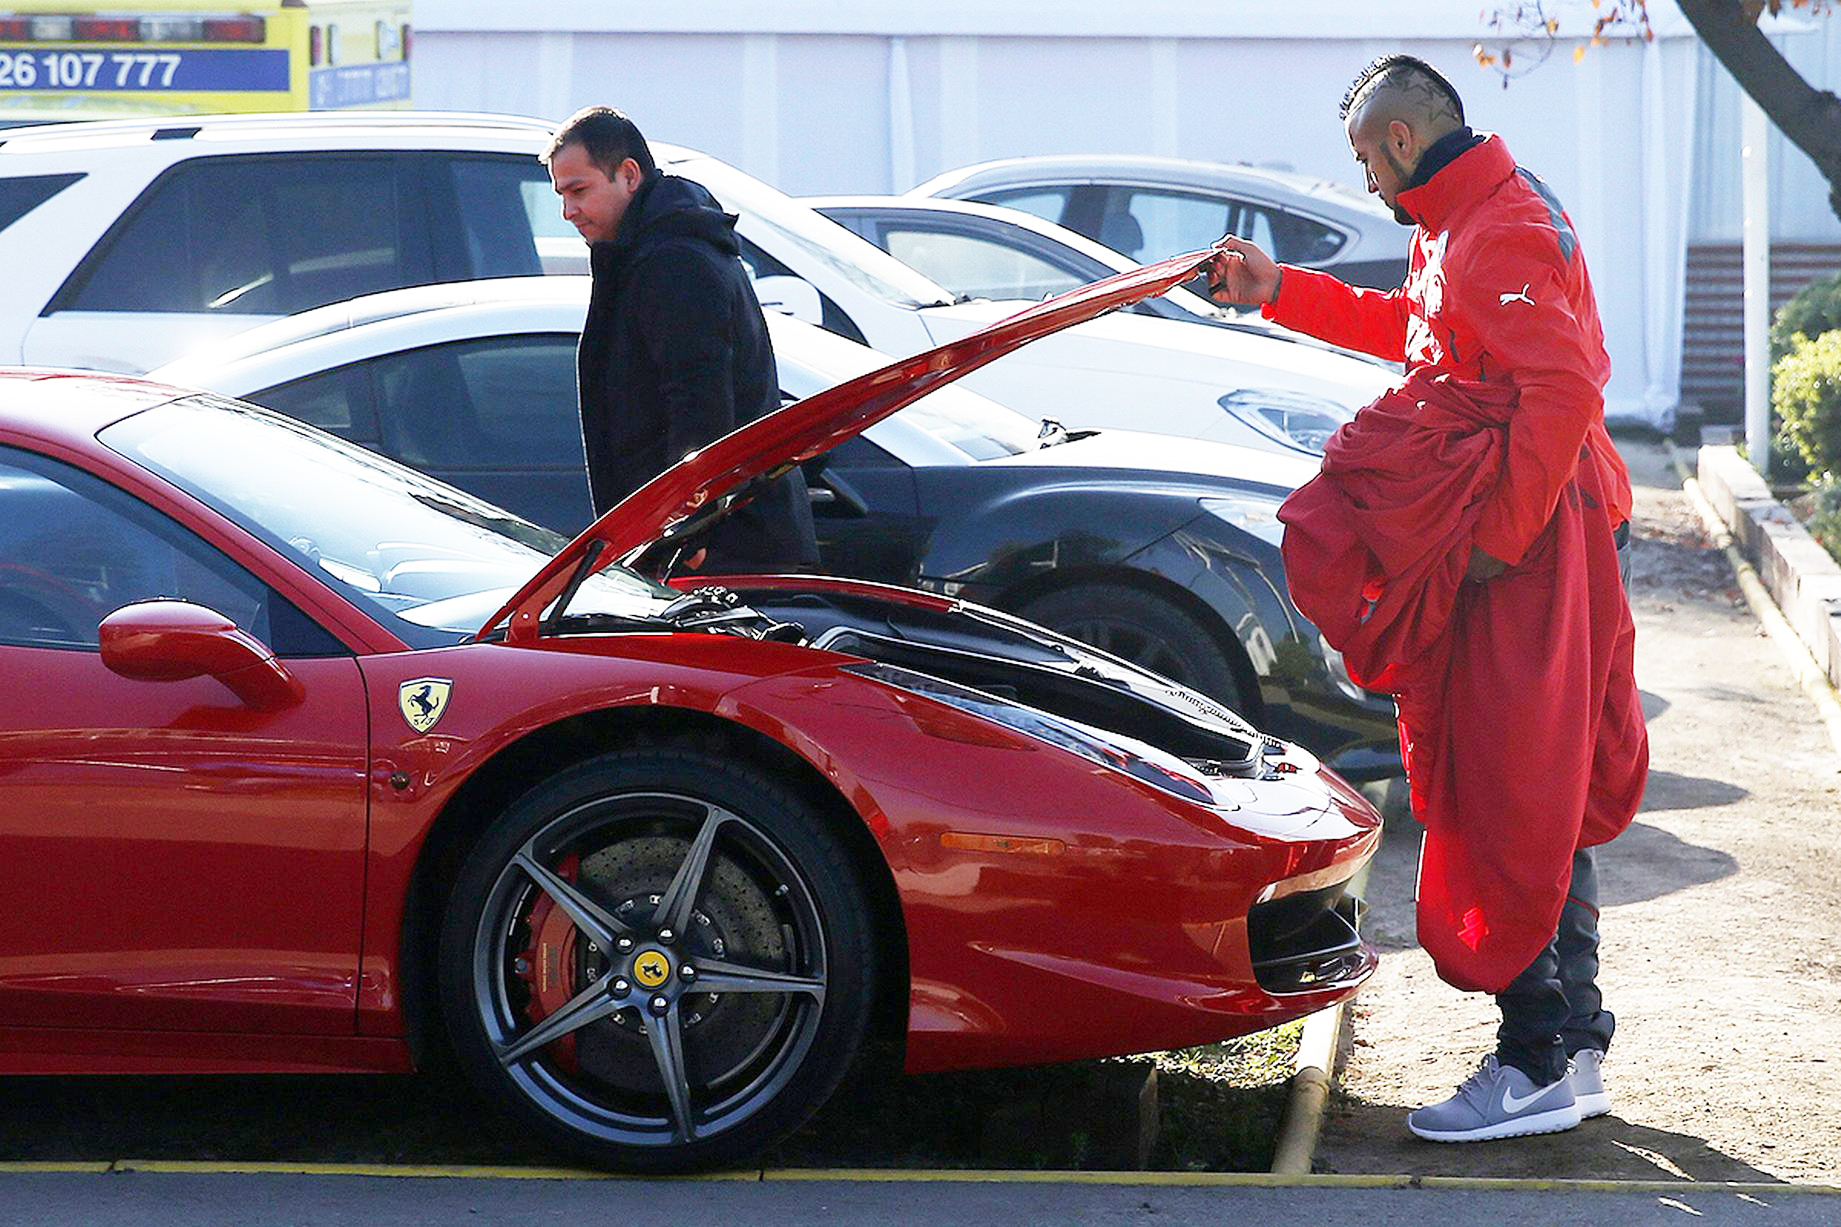 EPA_ONE-USE-ONLY-Arturo-Vidal-R-opens-the-trunk-of-his-Ferrari